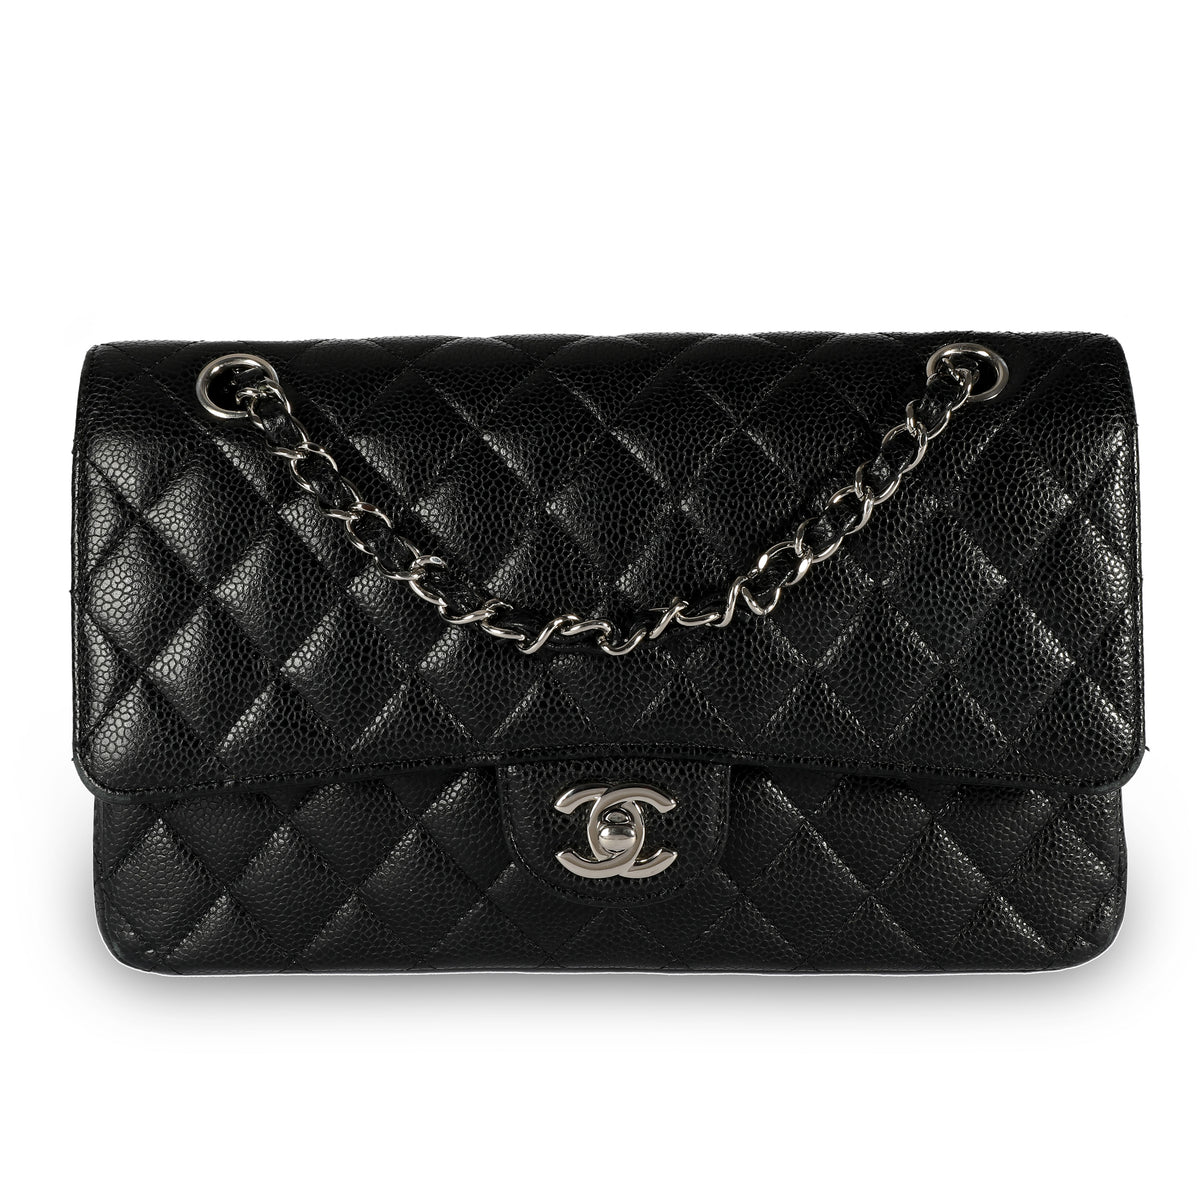 Chanel Black Caviar Quilted Medium Classic Double Flap Bag